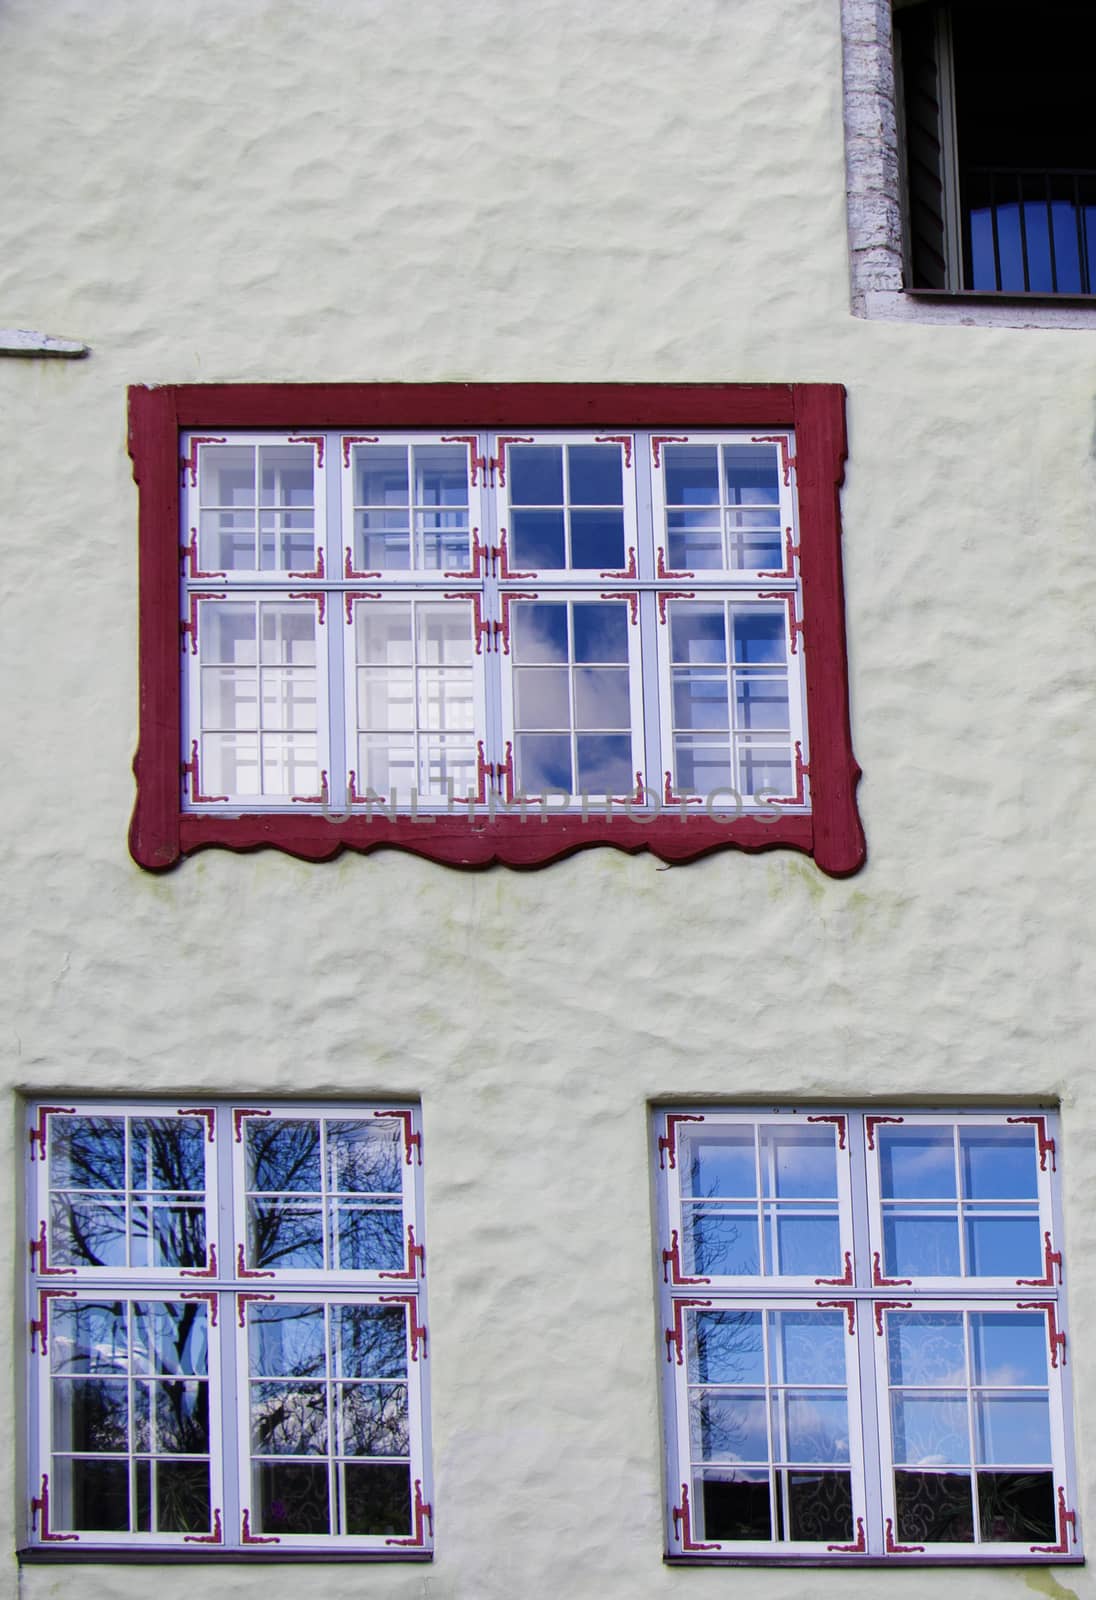 Buildings and architecture exterior view in old town of Tallinn, colorful old style house window. by Taidundua